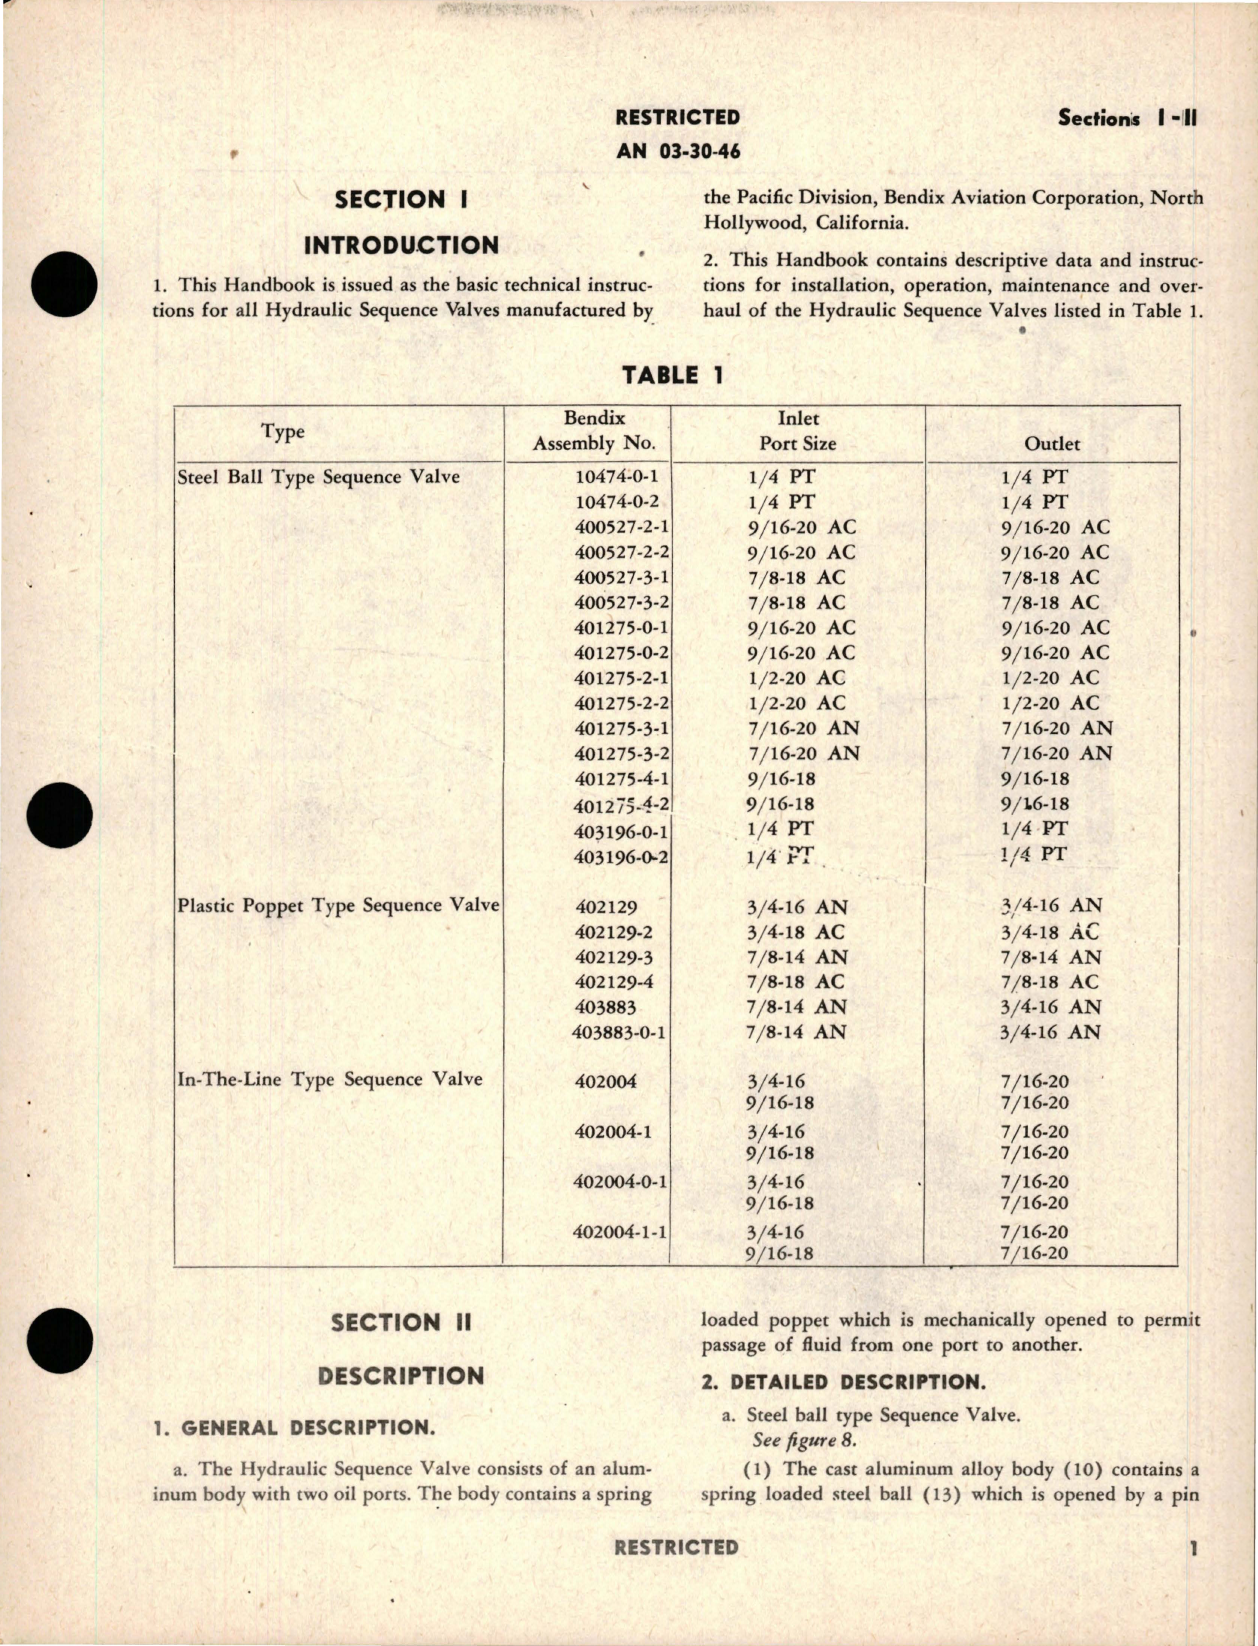 Sample page 5 from AirCorps Library document: Instructions with Parts Catalog for Hydraulic Sequence Valves - 403196 Series, 402004 Series, and 401275-4